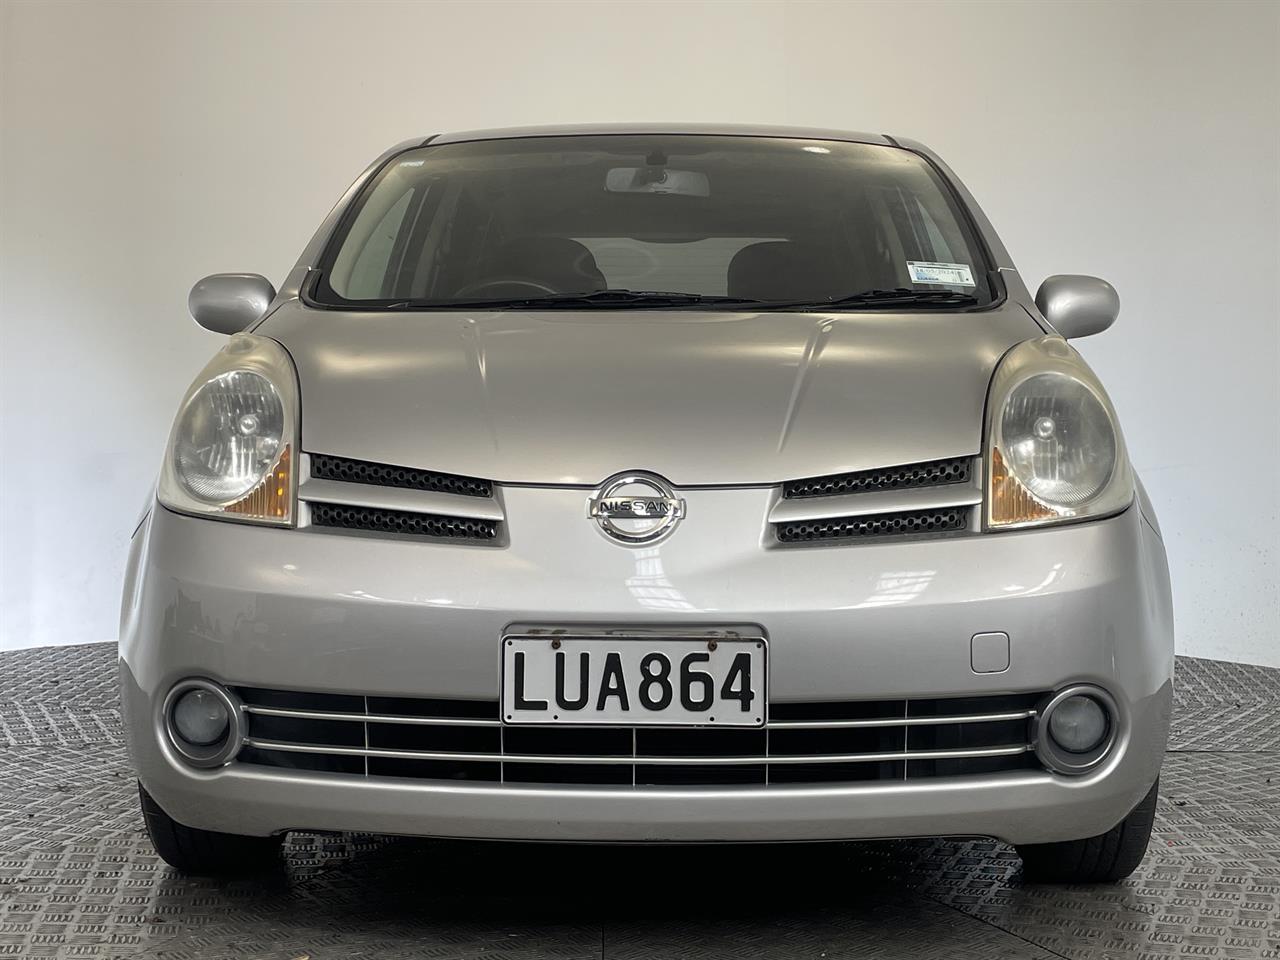 2005 Nissan Note